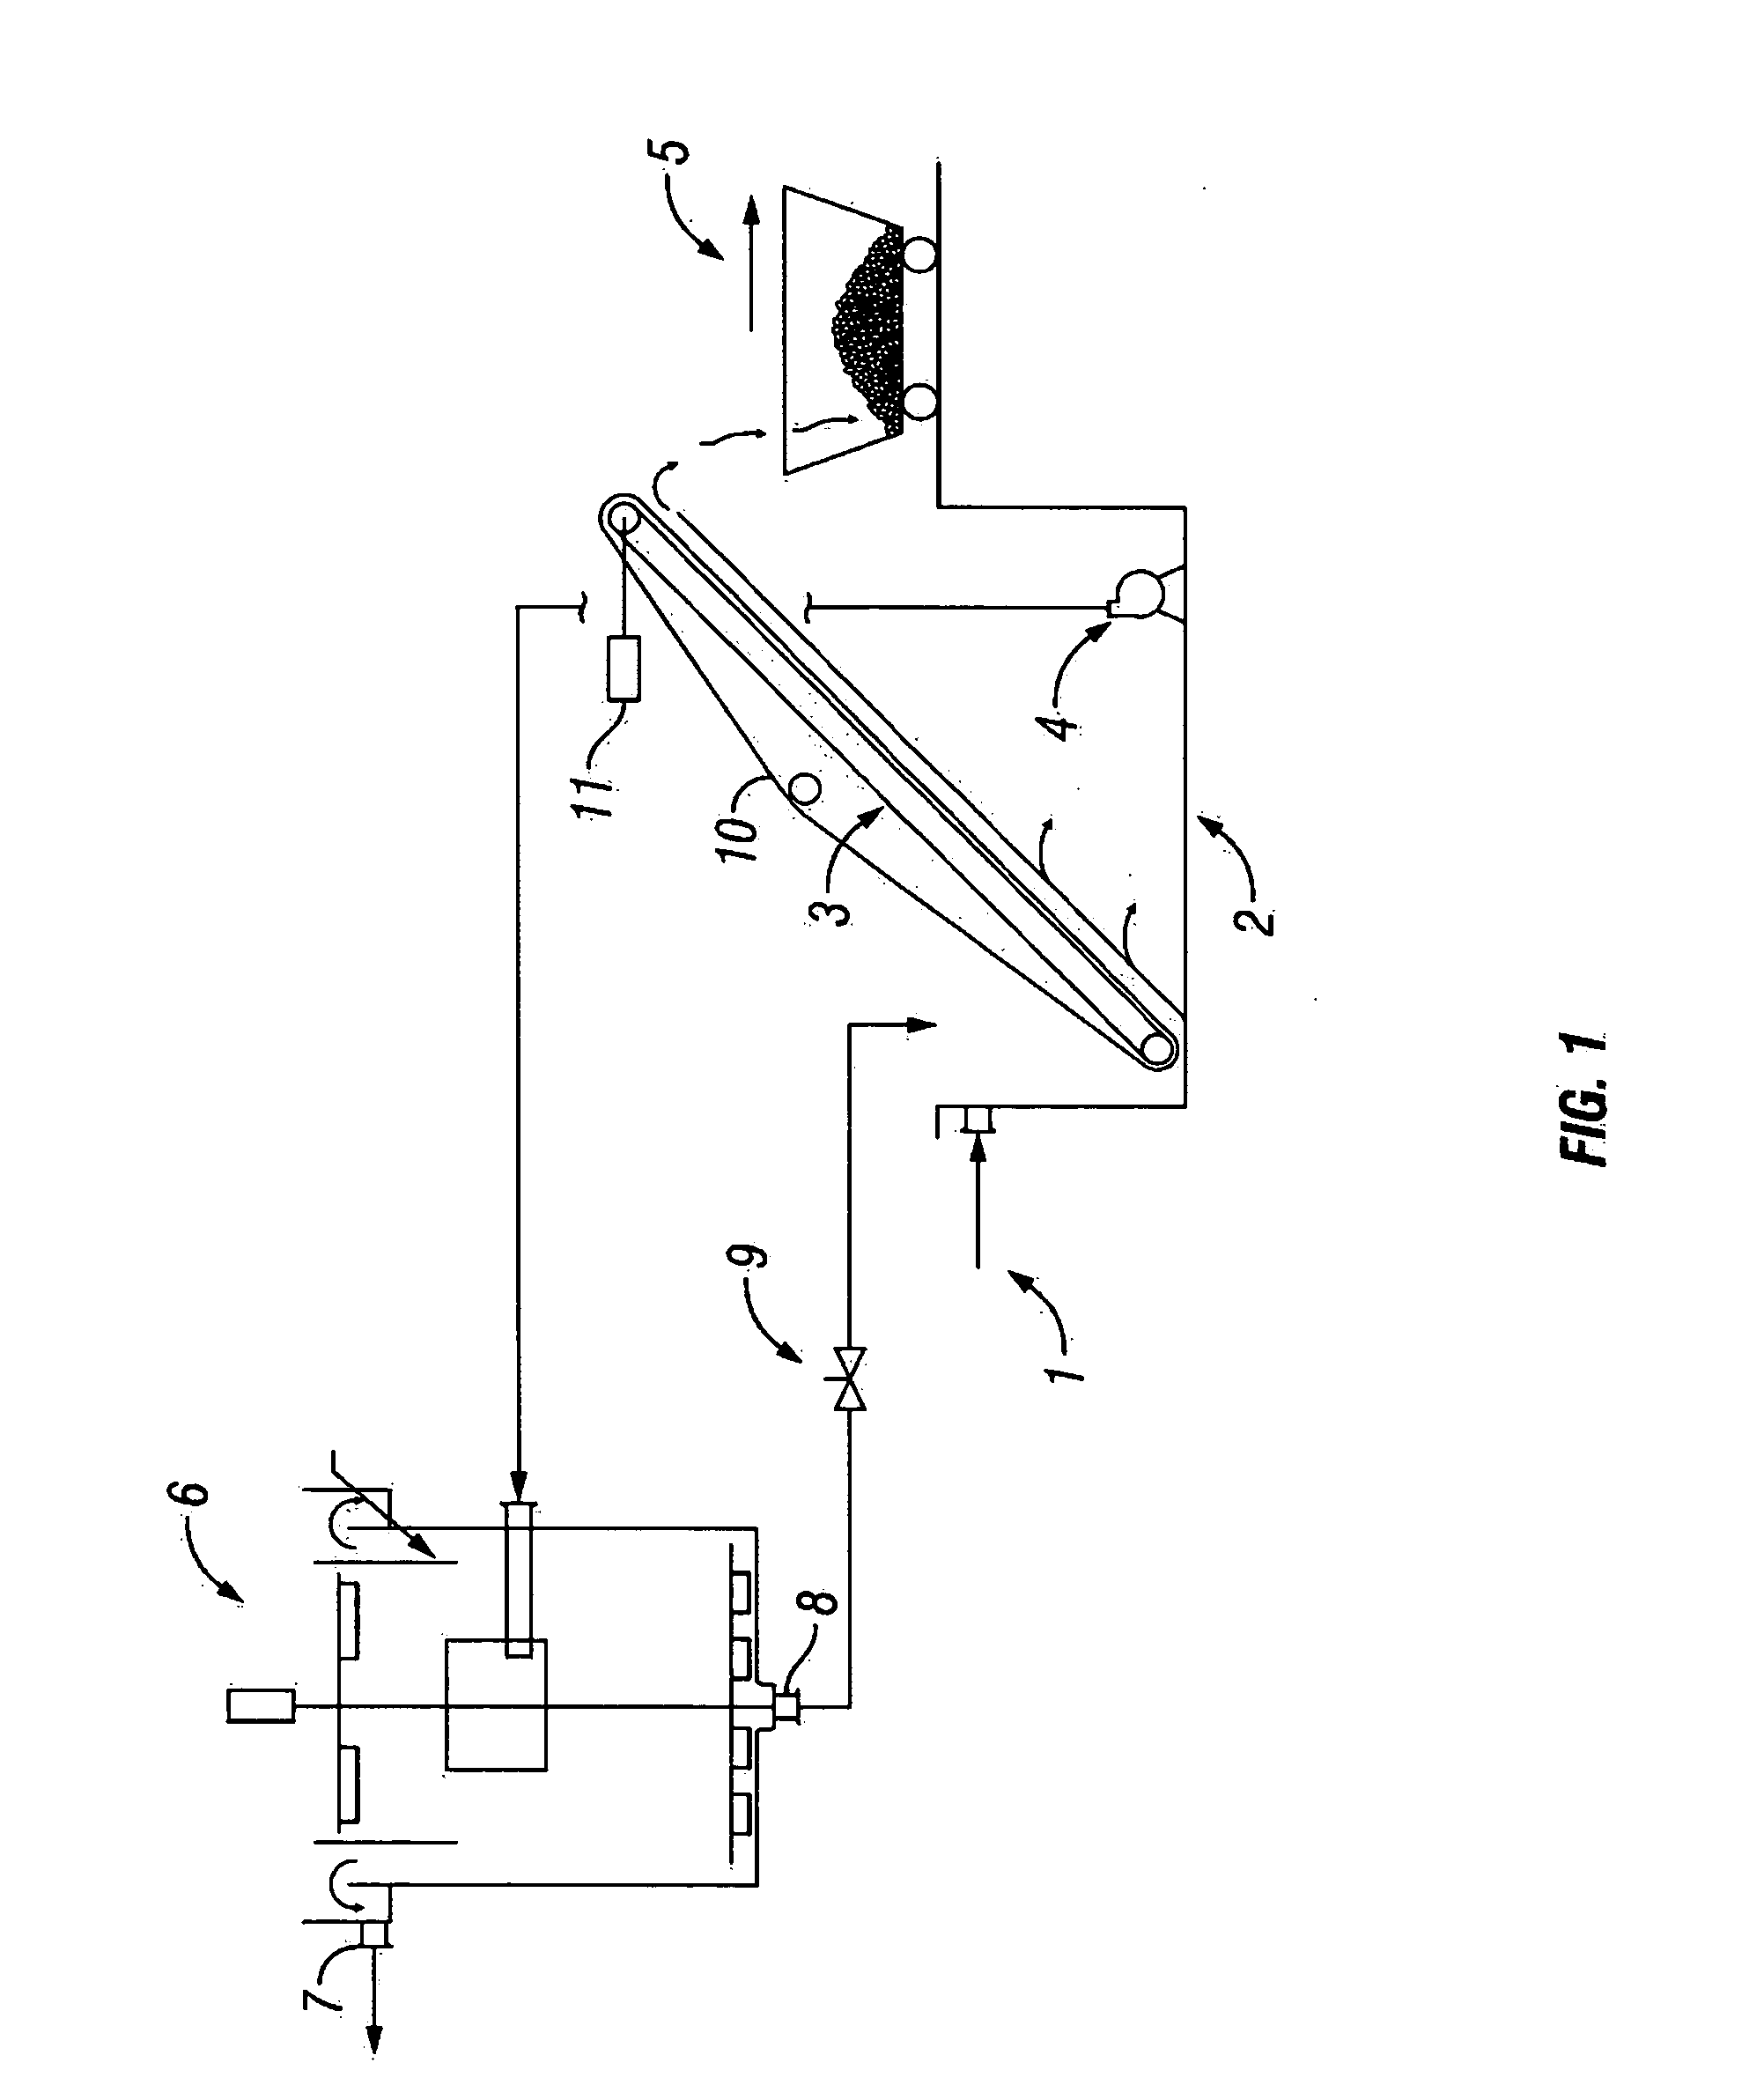 Method and apparatus for treating animal waste and wastewater